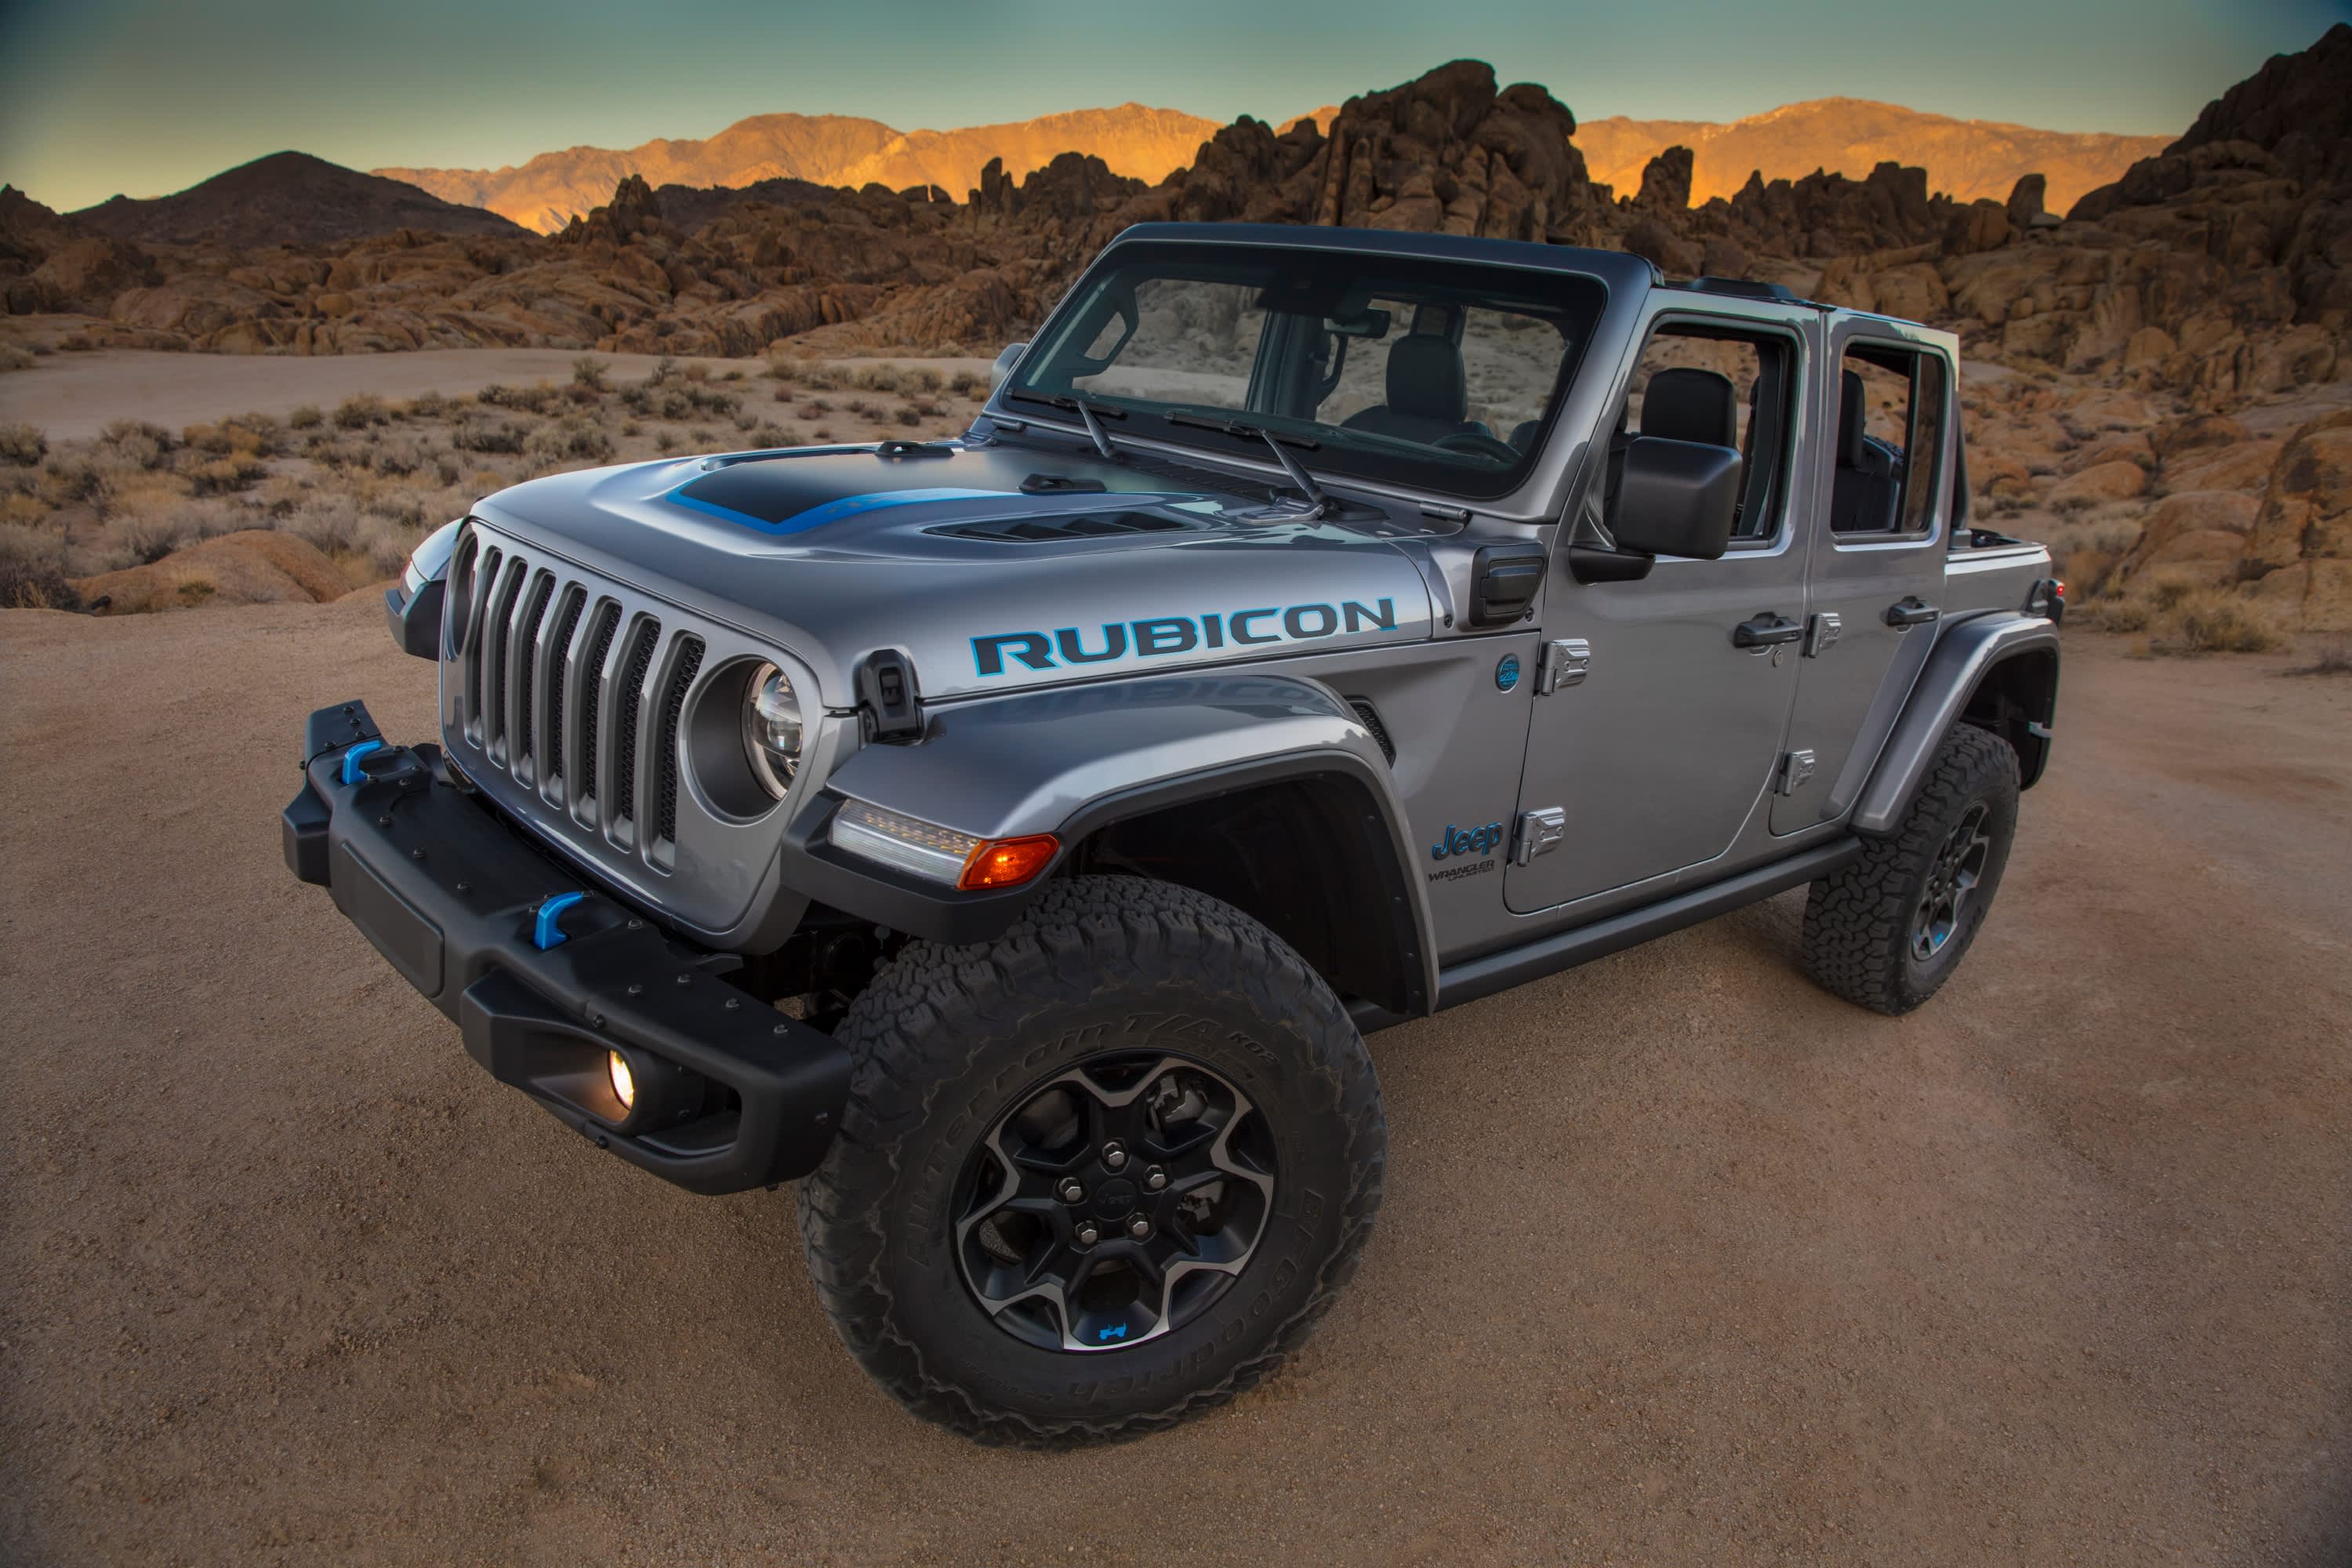 From Jeep to Maserati, Stellantis to roll out 10 new EV models in 2021